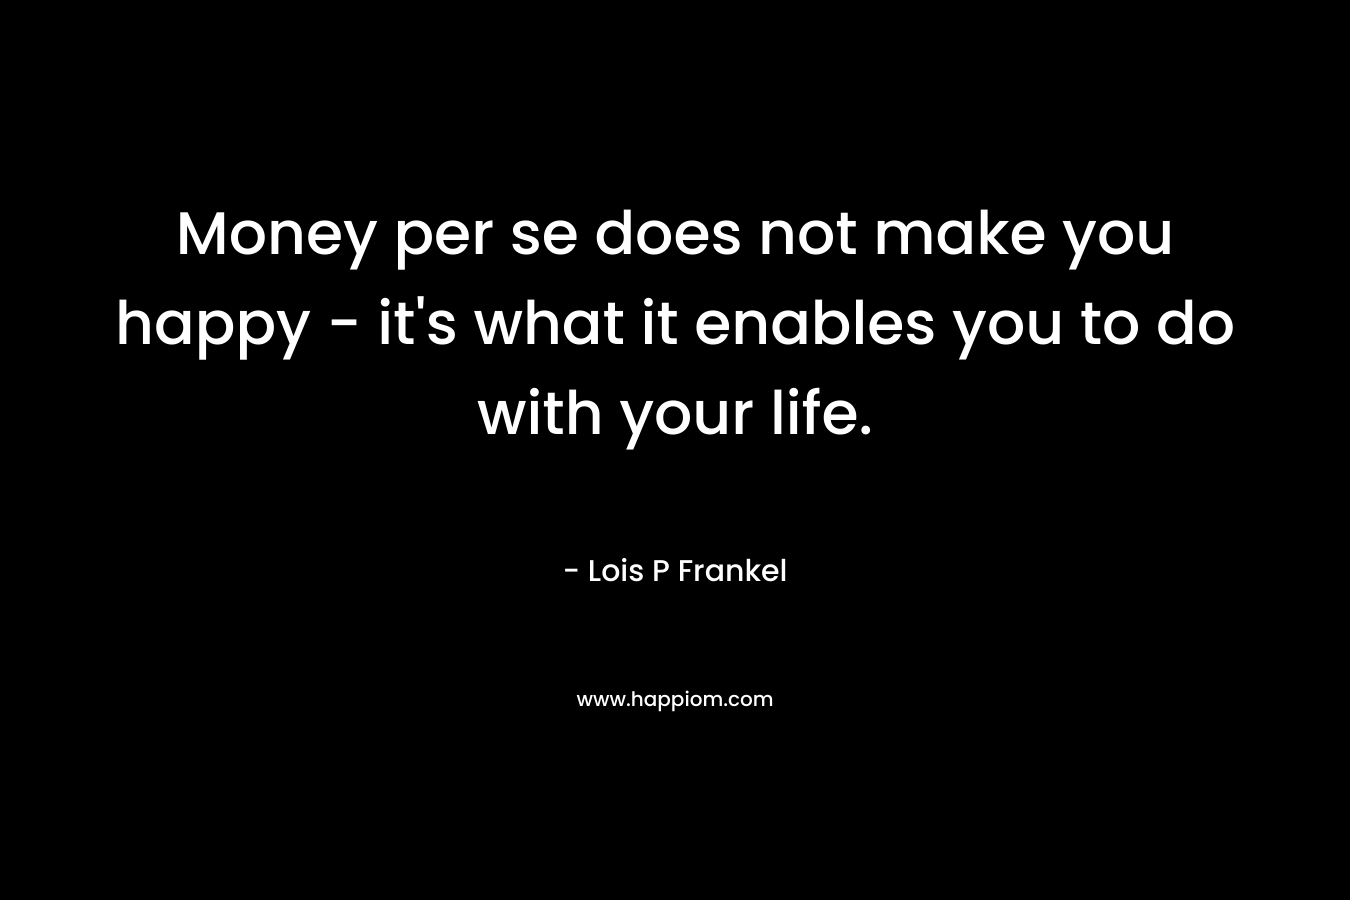 Money per se does not make you happy - it's what it enables you to do with your life.